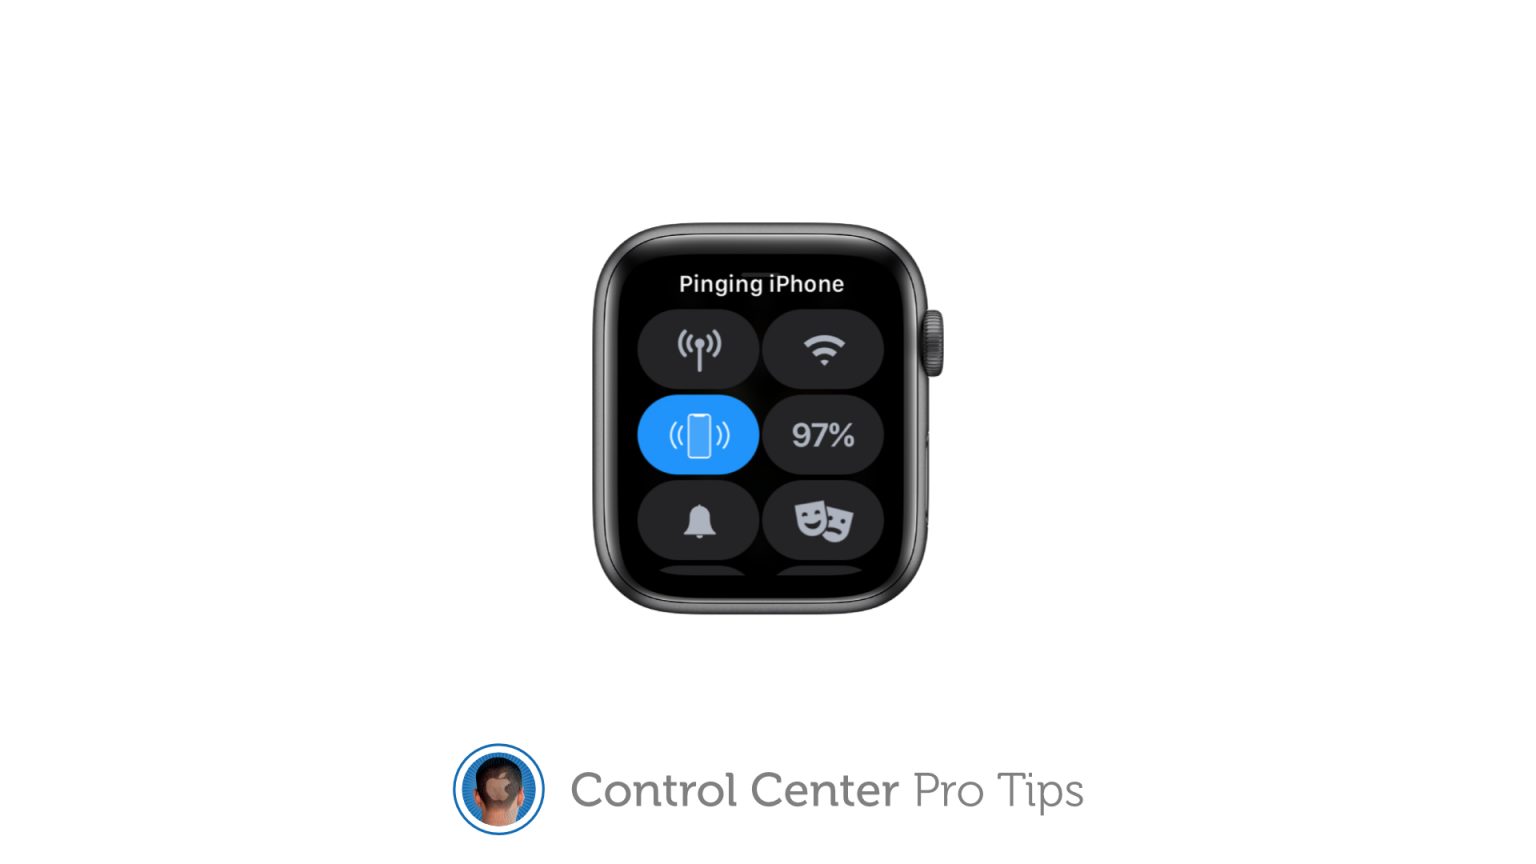 Ping a lost iPhone using Control Center on Apple Watch